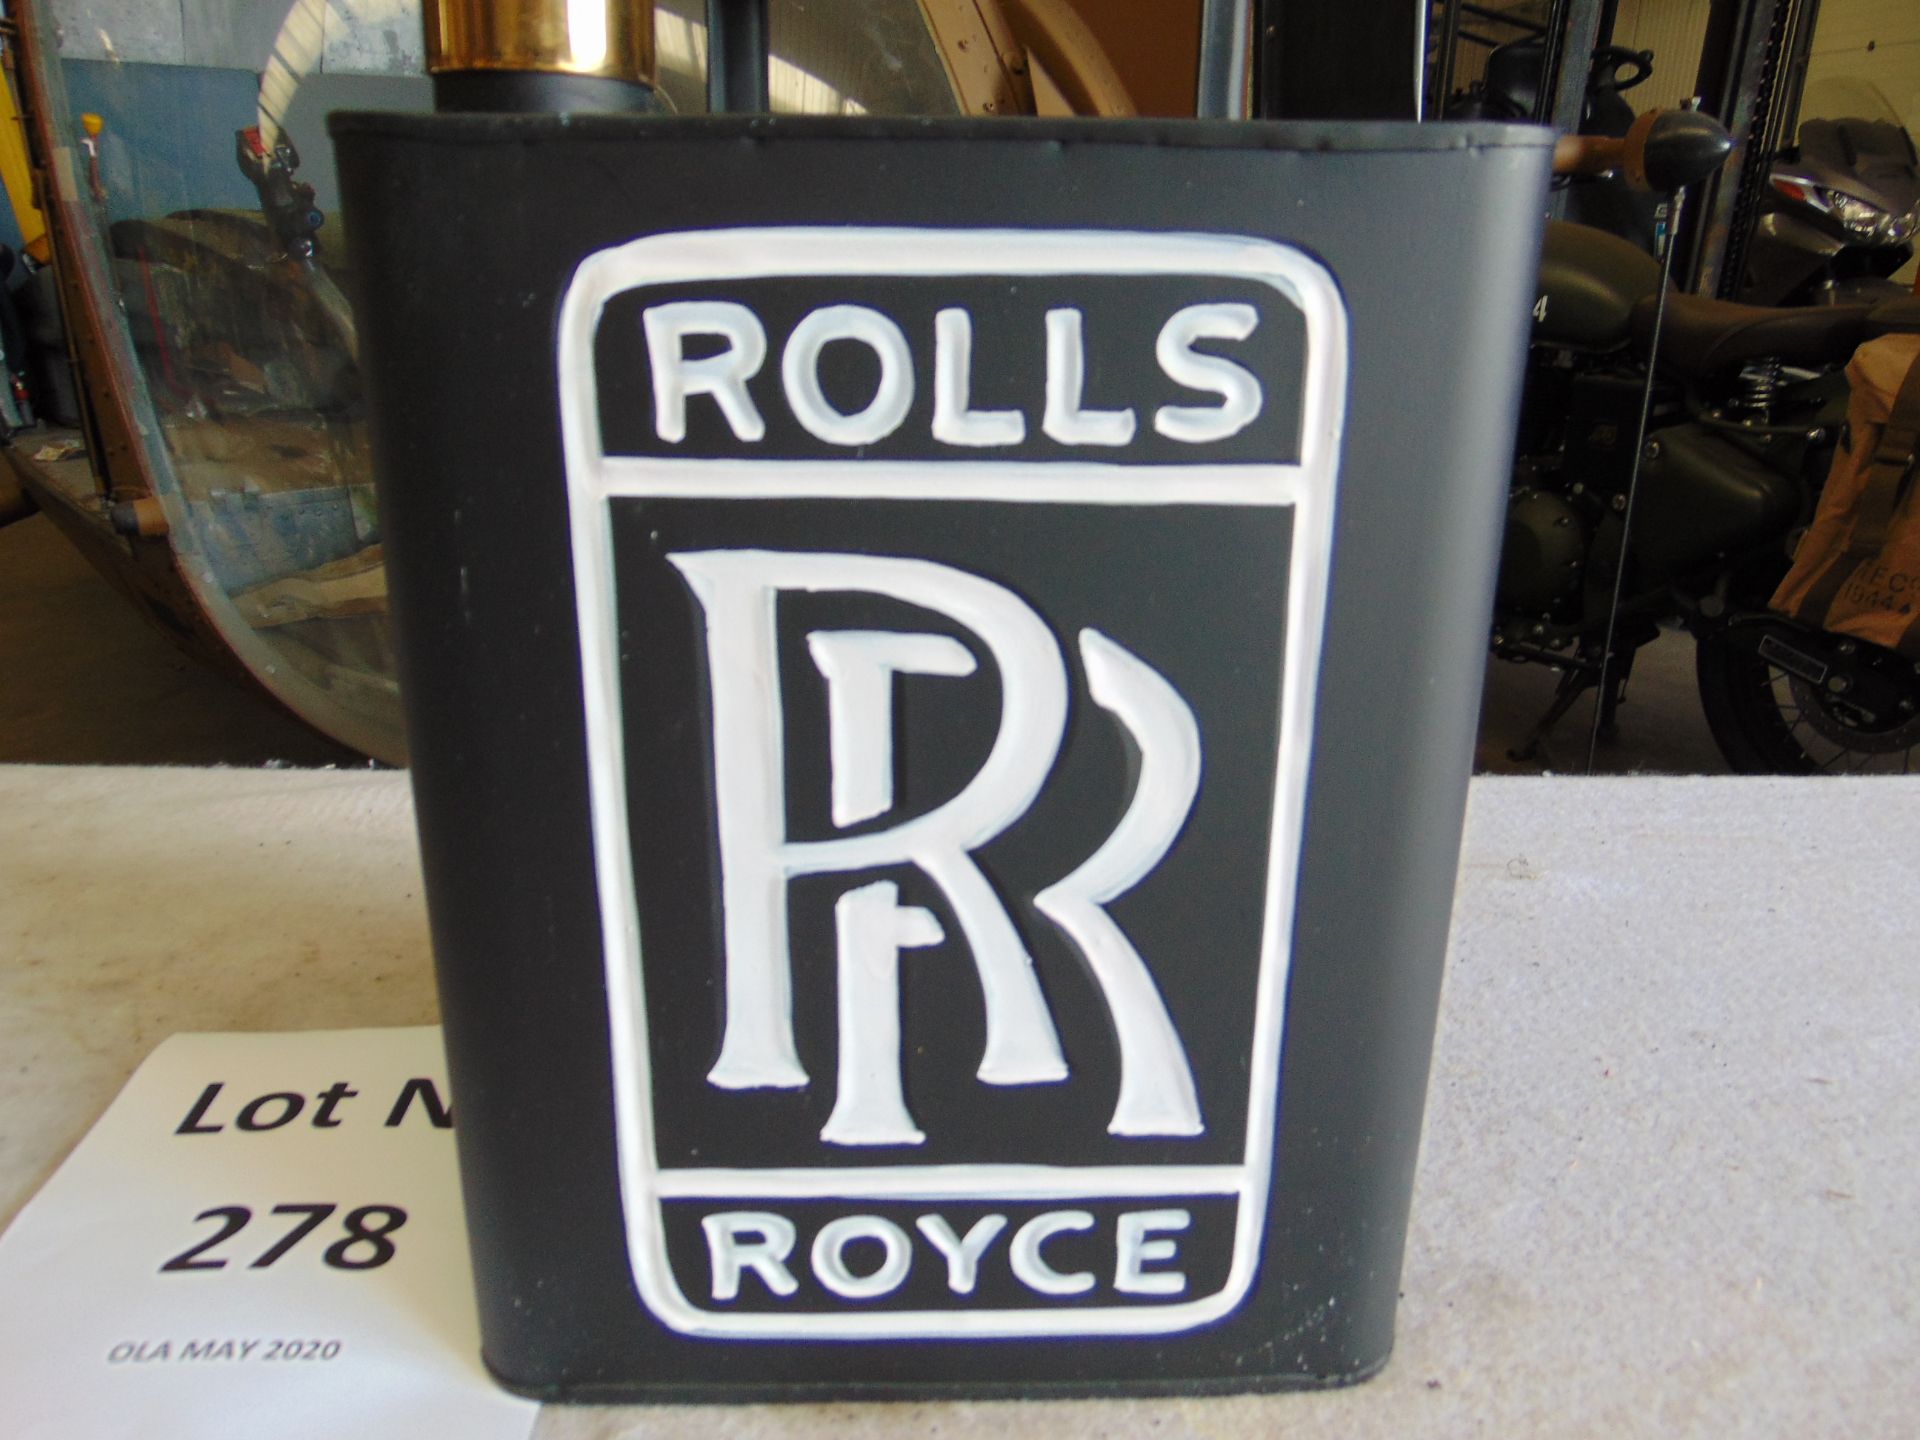 Unused Rolls Royce Fuel/Oil Can with brass screw cap - Image 2 of 4